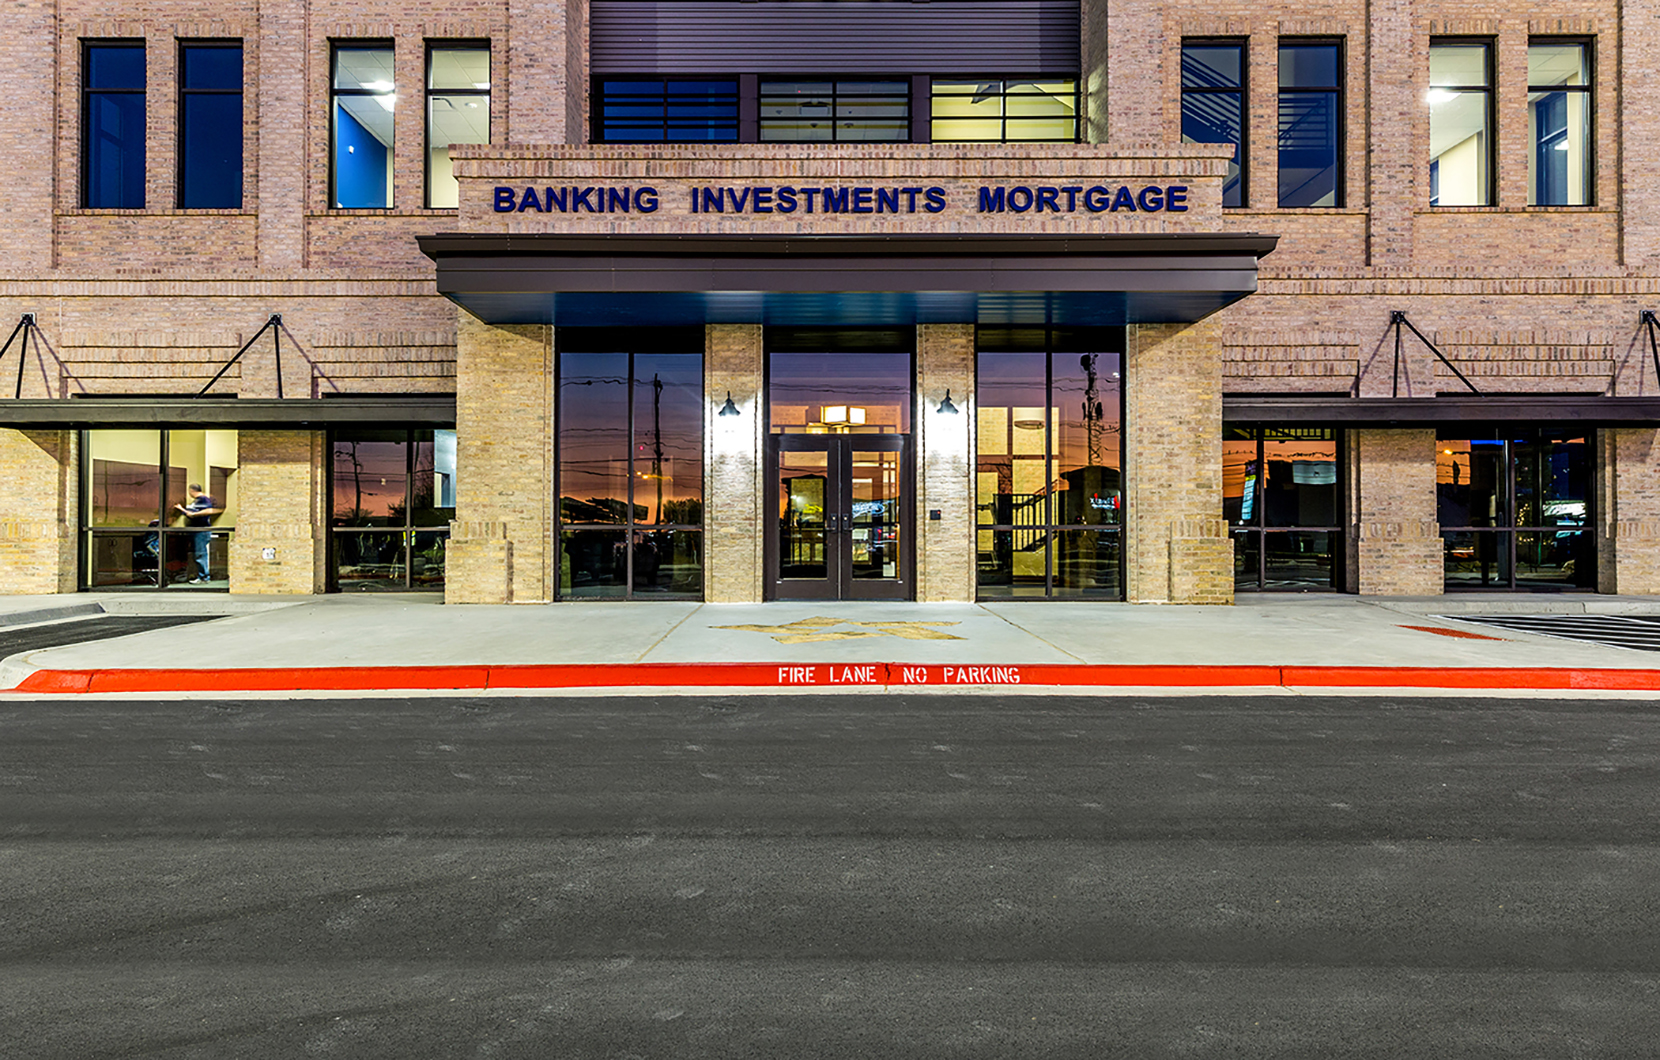 With Estrada Hinojosa's expertise added to Texas Regional Bank's resources, the collective entity can offer a comprehensive suite of financial solutions tailored to public entities of varying sizes. (Photo: Marek Bros)